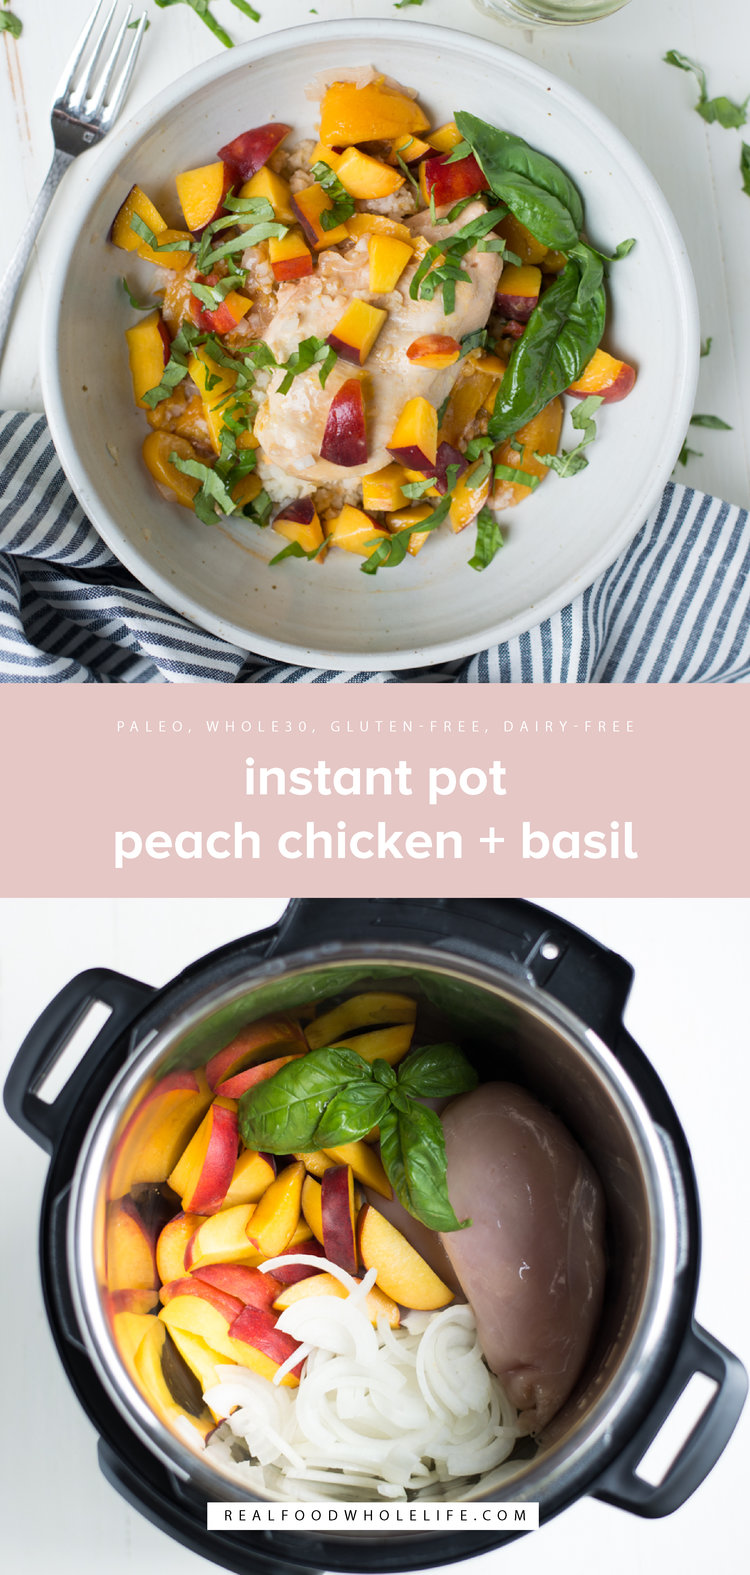 Instant Pot Peach Chicken & Basil. Just the thing for a healthy, simple dinner any night of the week. A gluten-free, dairy-free, paleo, whole30 recipe.